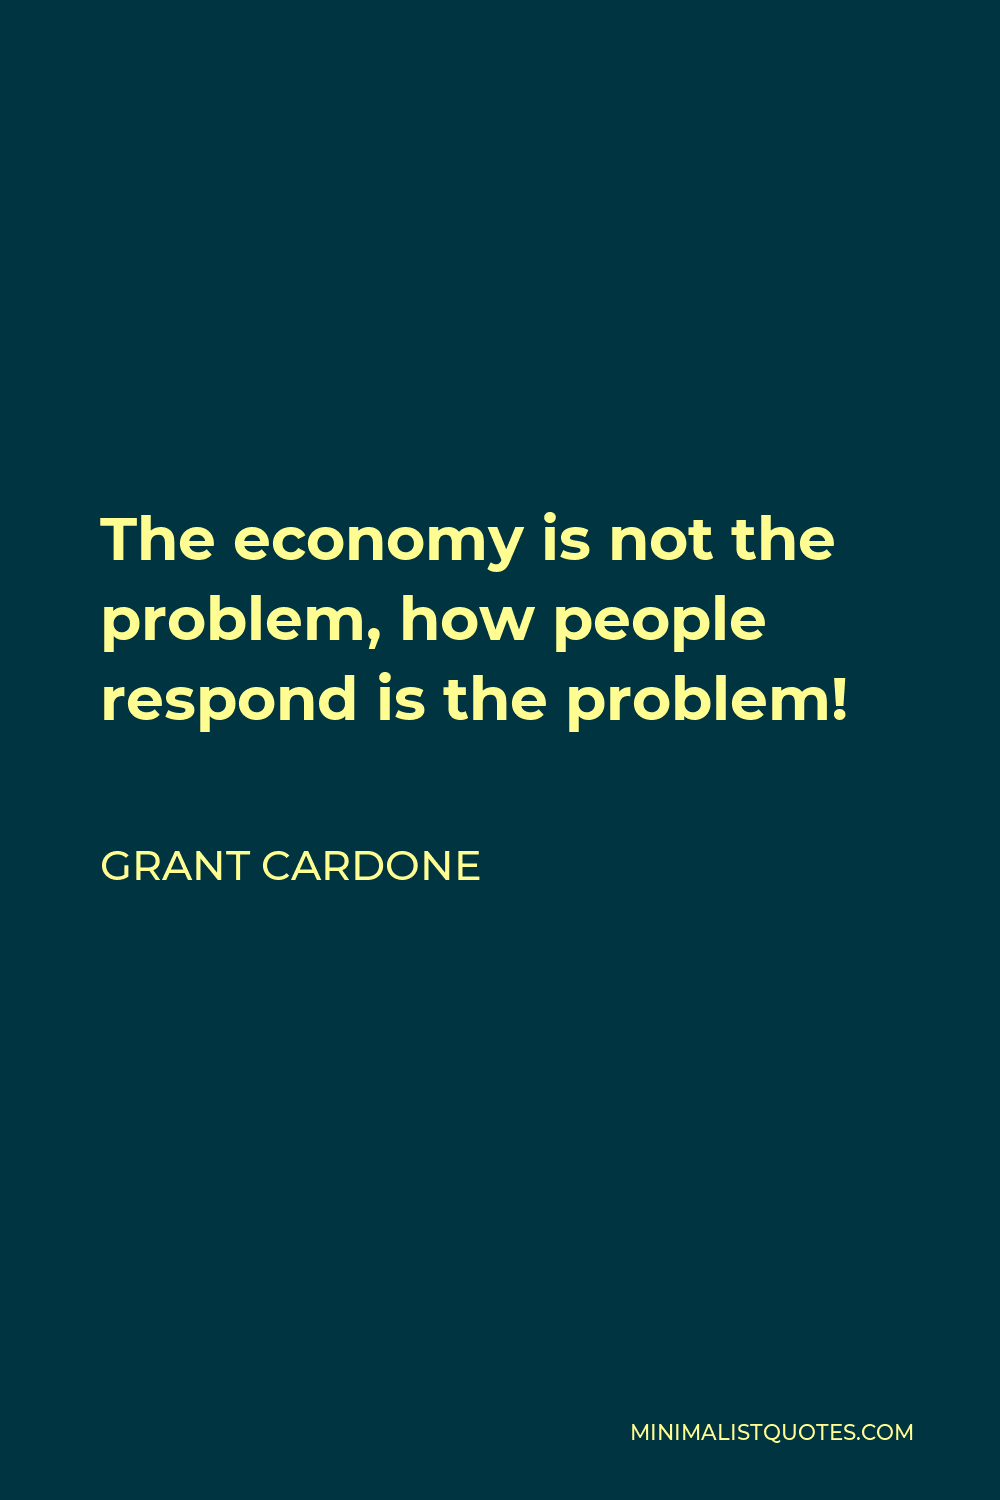 Grant Cardone Quote - The economy is not the problem, how people respond is the problem!